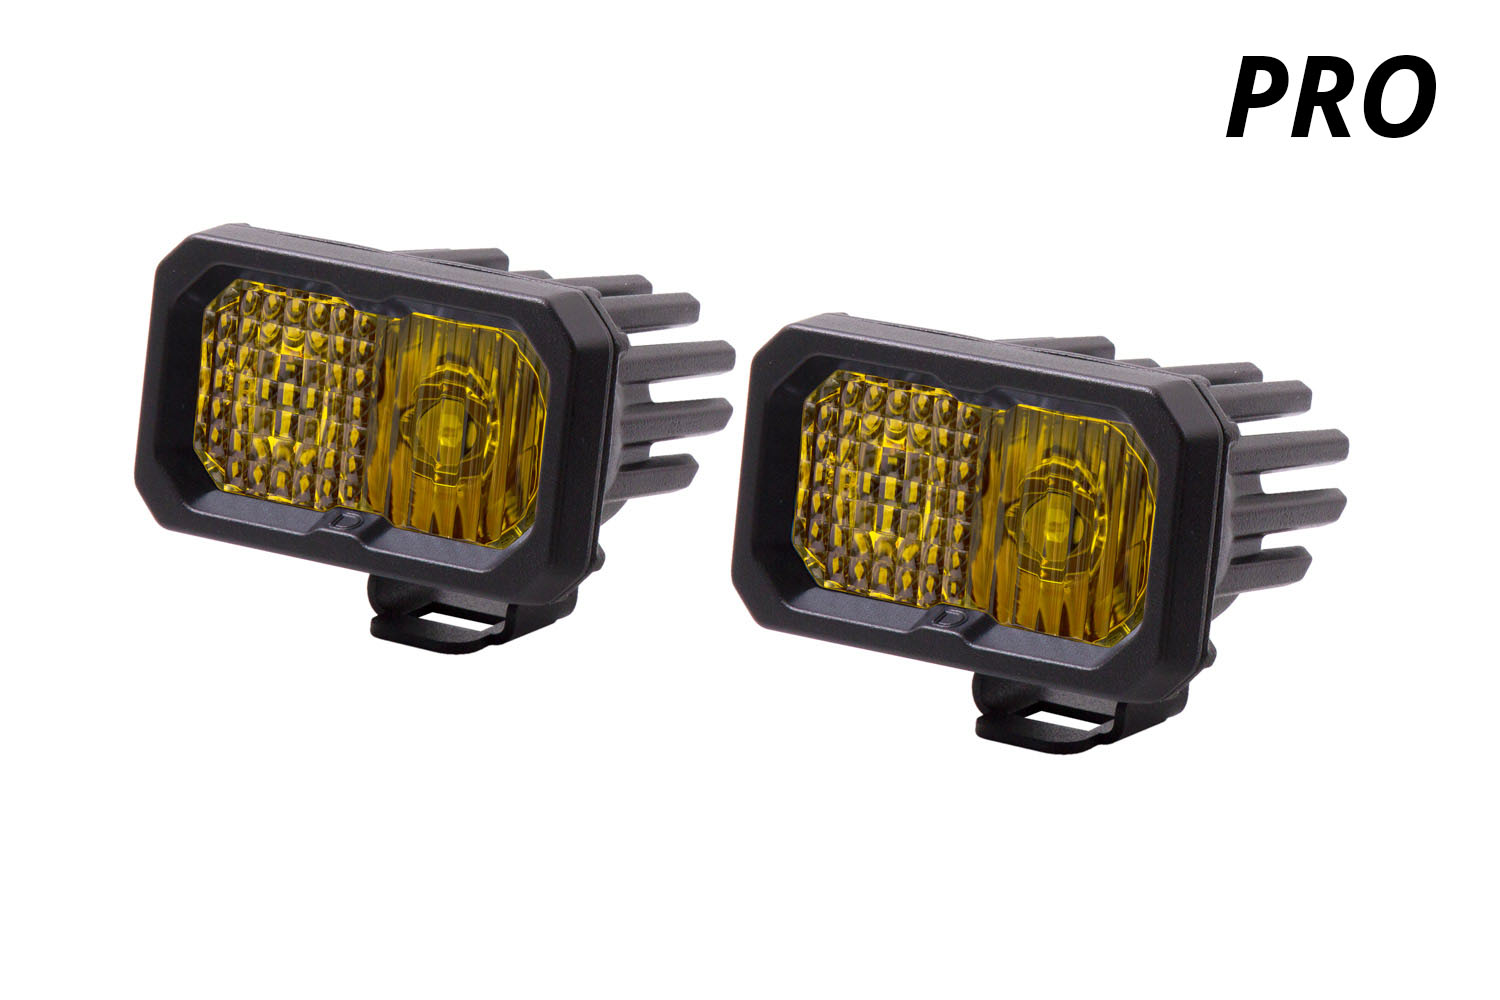 Diode Dynamics Stage Series 2 Inch LED Pod, Pro Yellow Driving Standard ABL Pair - Click Image to Close